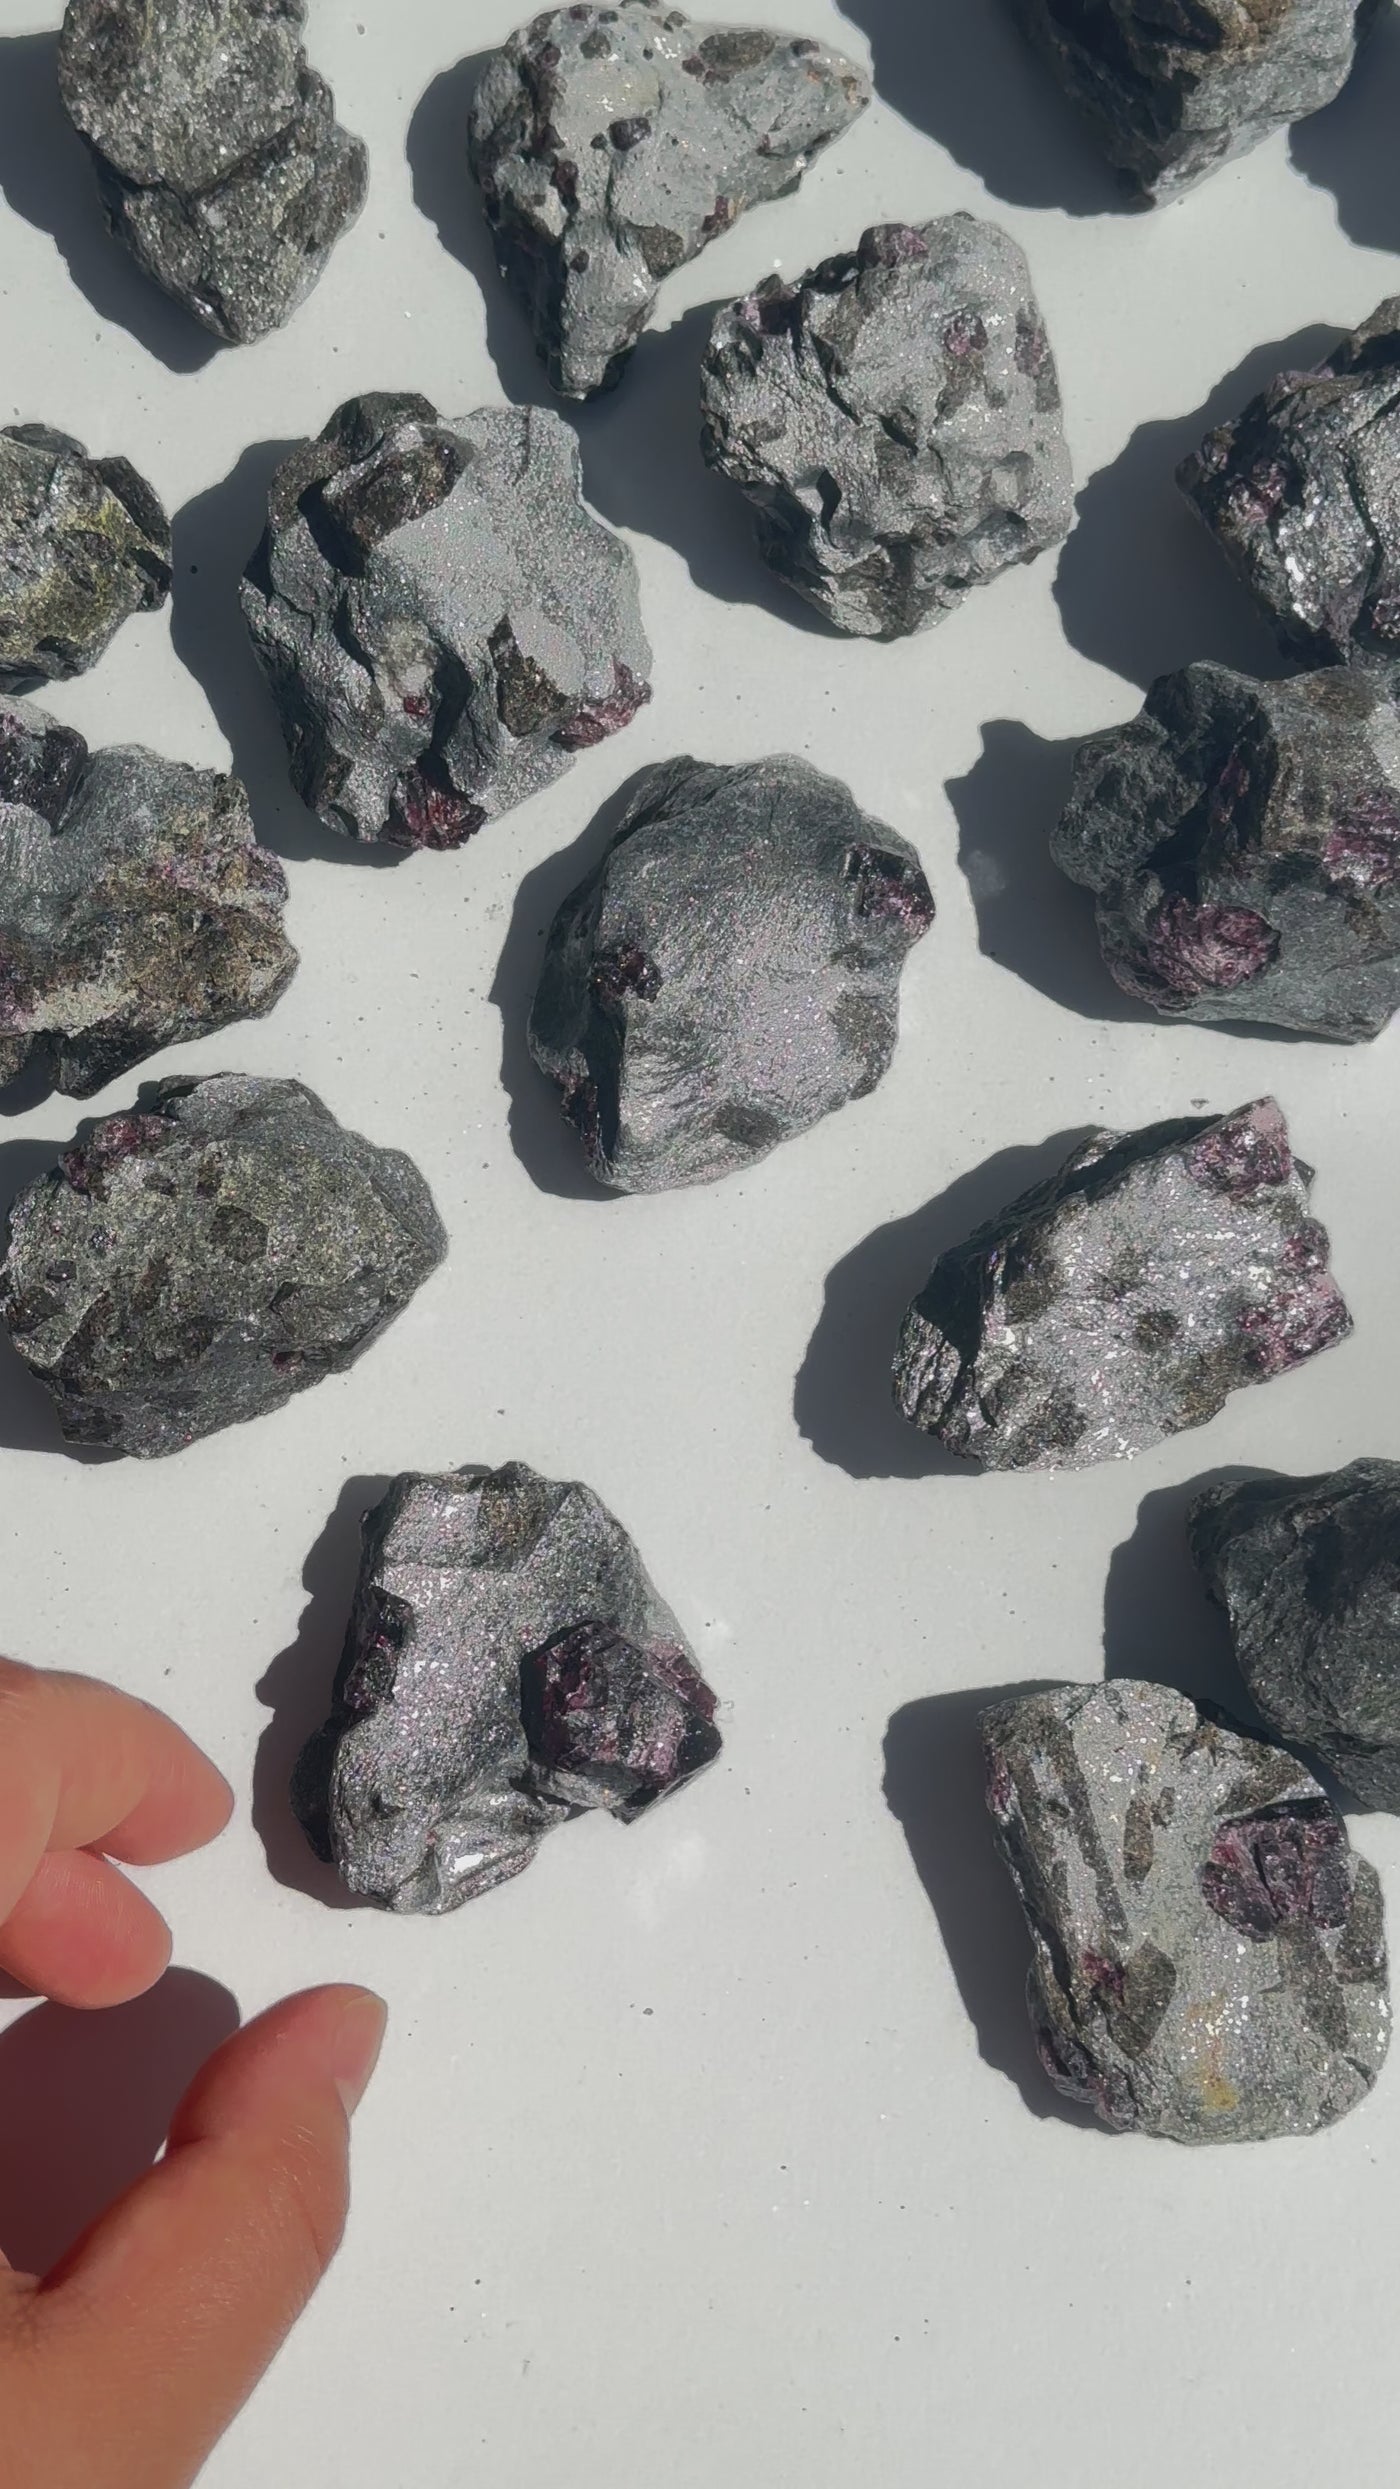 Garnet on Hematite Matrix - Natural Crystal video of hand picking up stone and turning it in the sun to see flashes